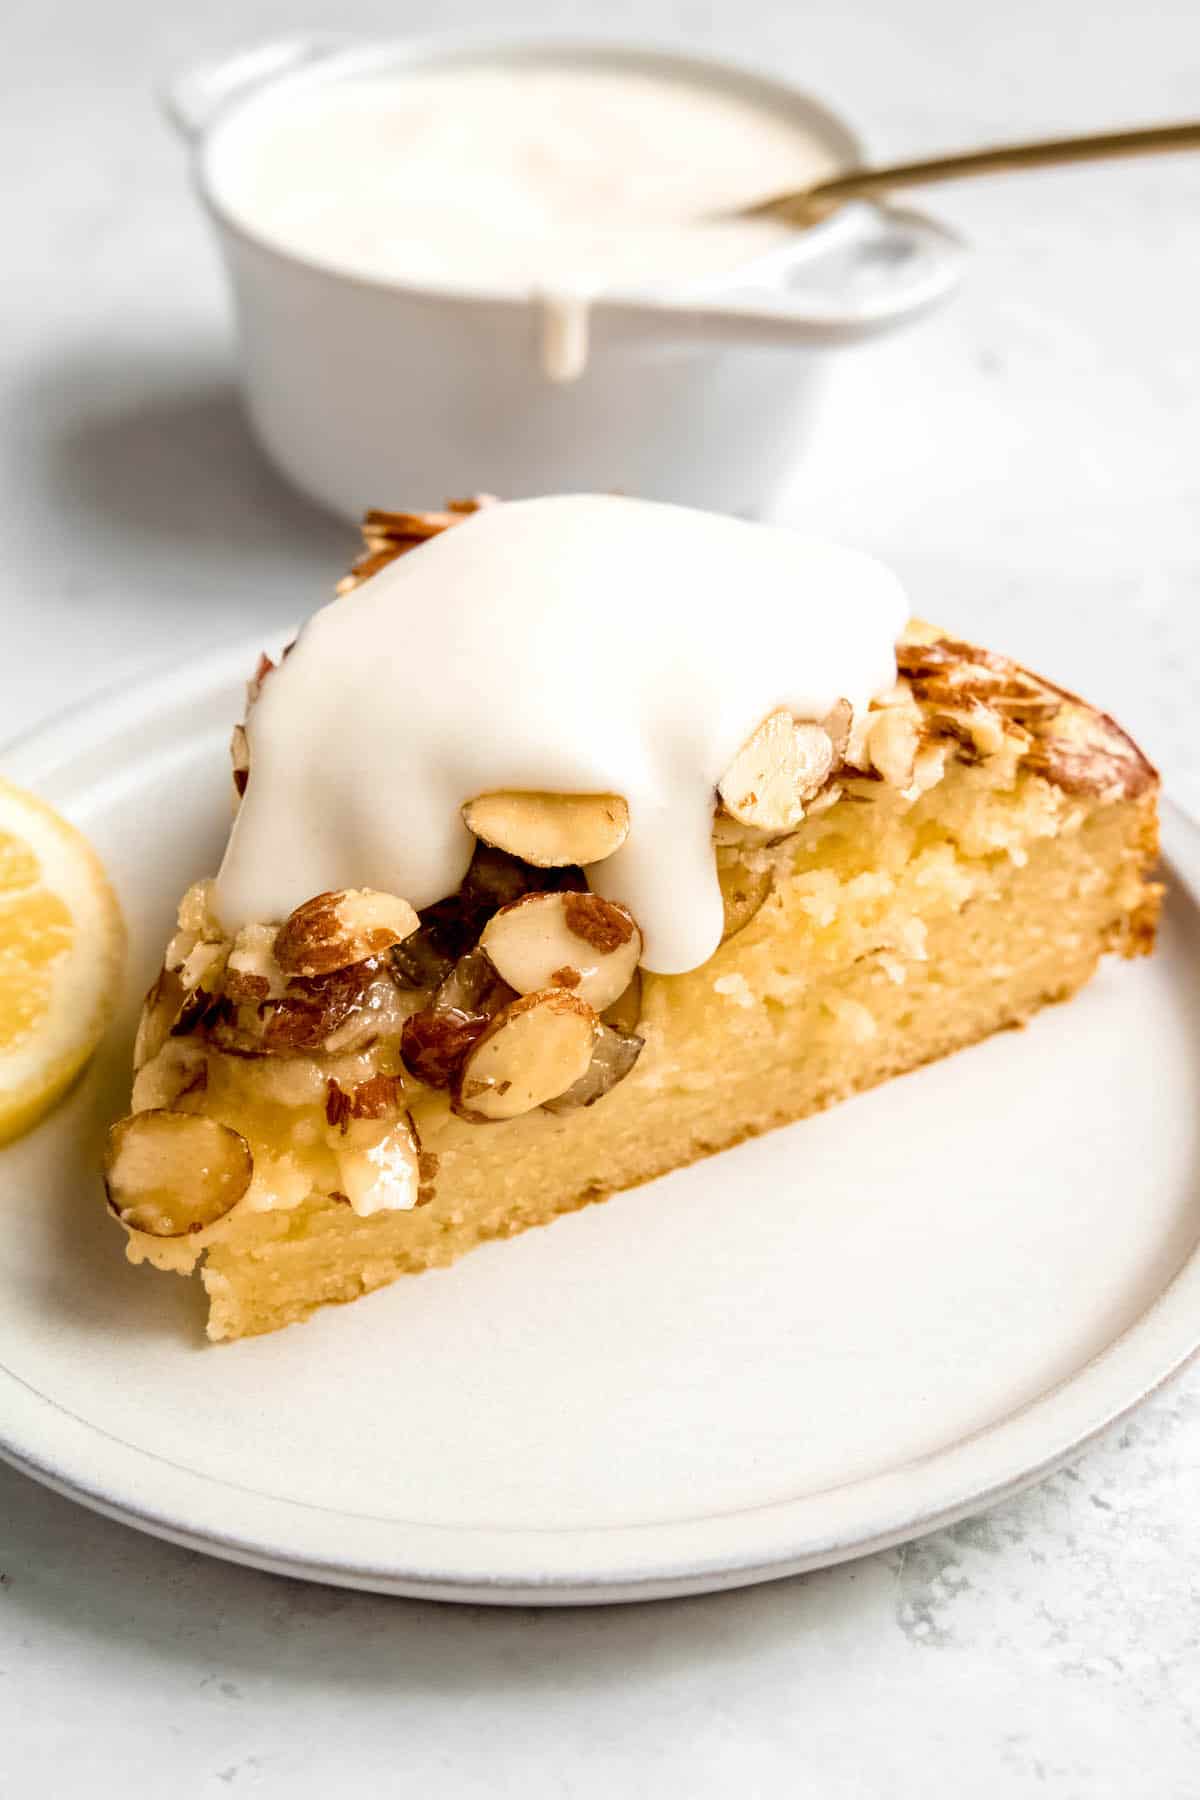 slice of Italian lemon almond cake on a white dessert plate topped with a dribble of whipped sweet ricotta.